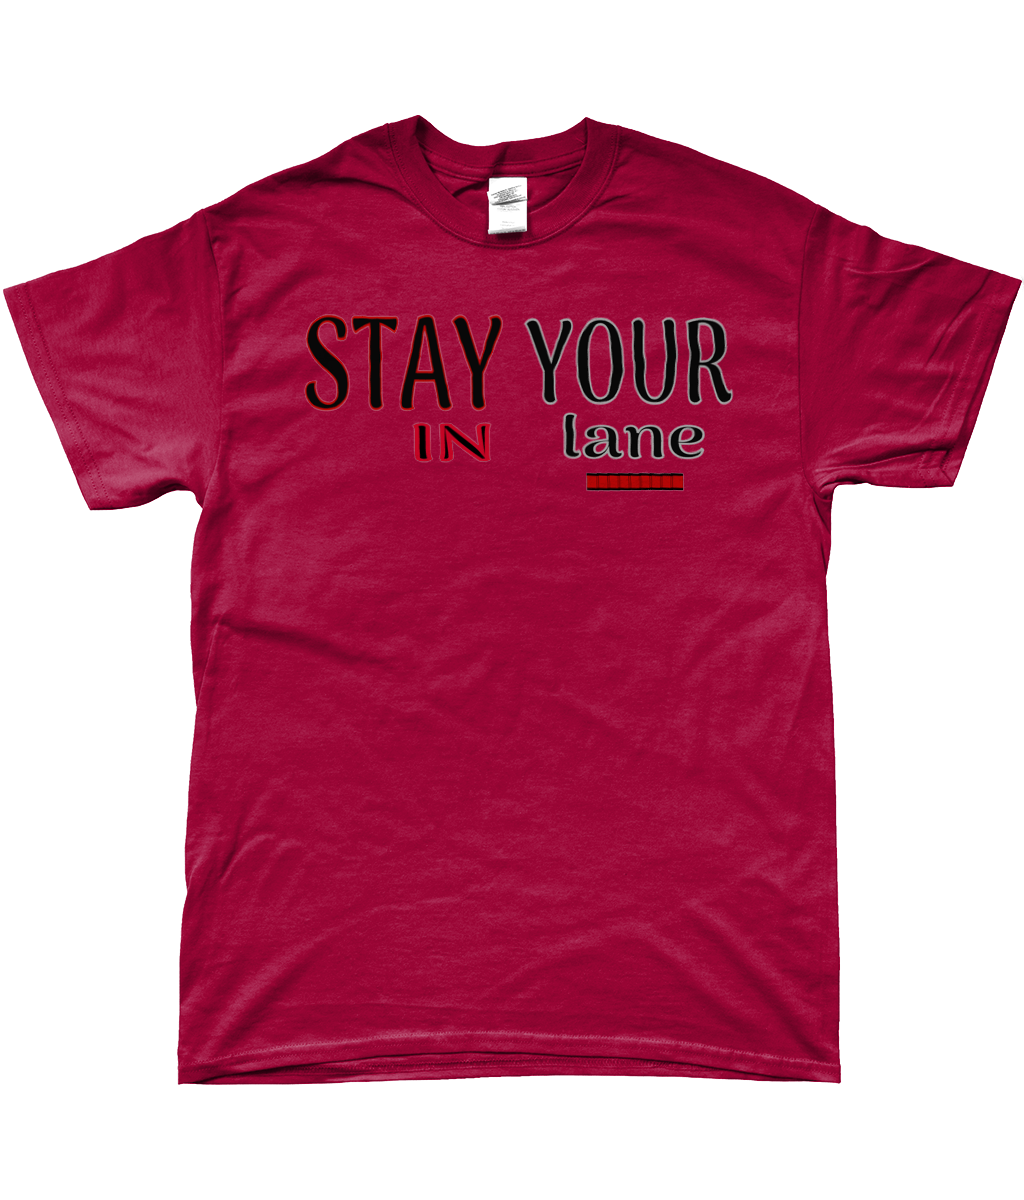 STAY IN YOUR lane 01-02 Designer Unisex Gildan SoftStyle® Ringspun Cotton T-shirt (16 colors)